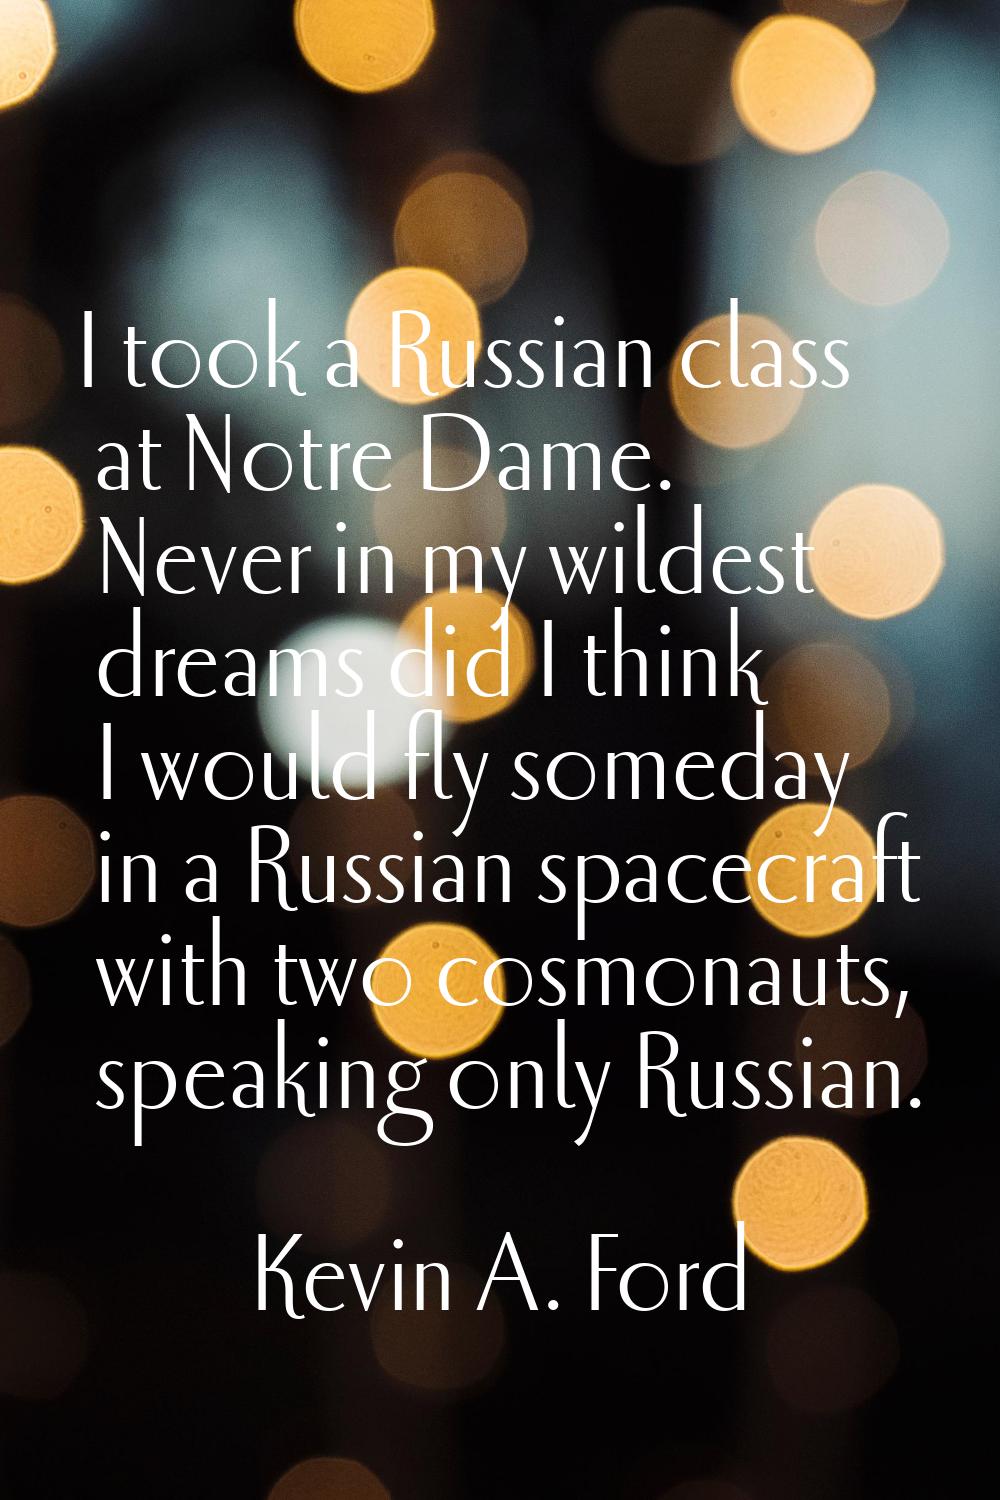 I took a Russian class at Notre Dame. Never in my wildest dreams did I think I would fly someday in